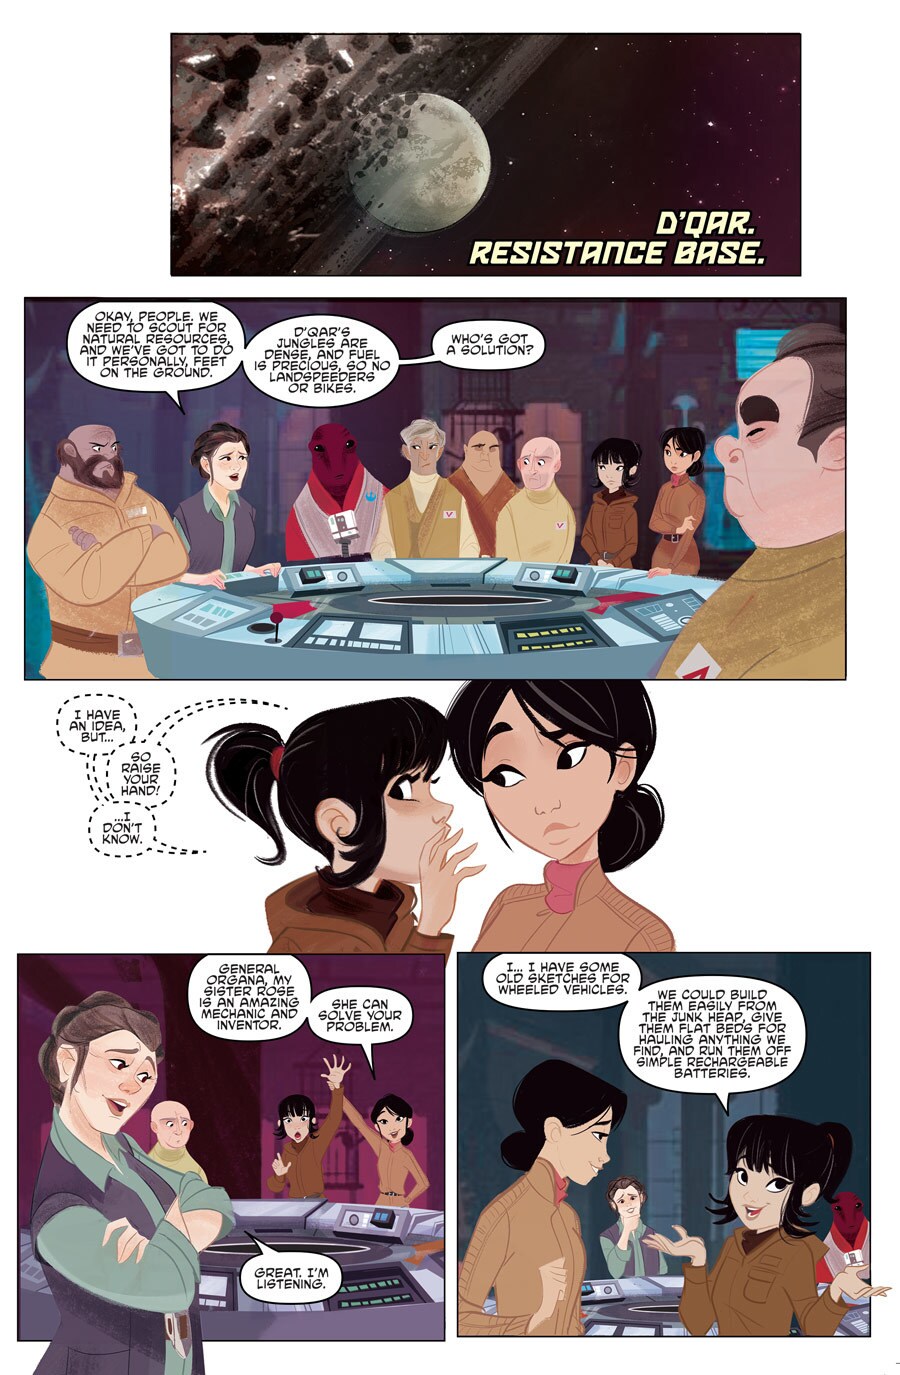 In panels from the comic book Star Wars Forces of Destiny: Rose & Paige, Rose offers a solution to General Organa's dilemma with scouting for natural resources.